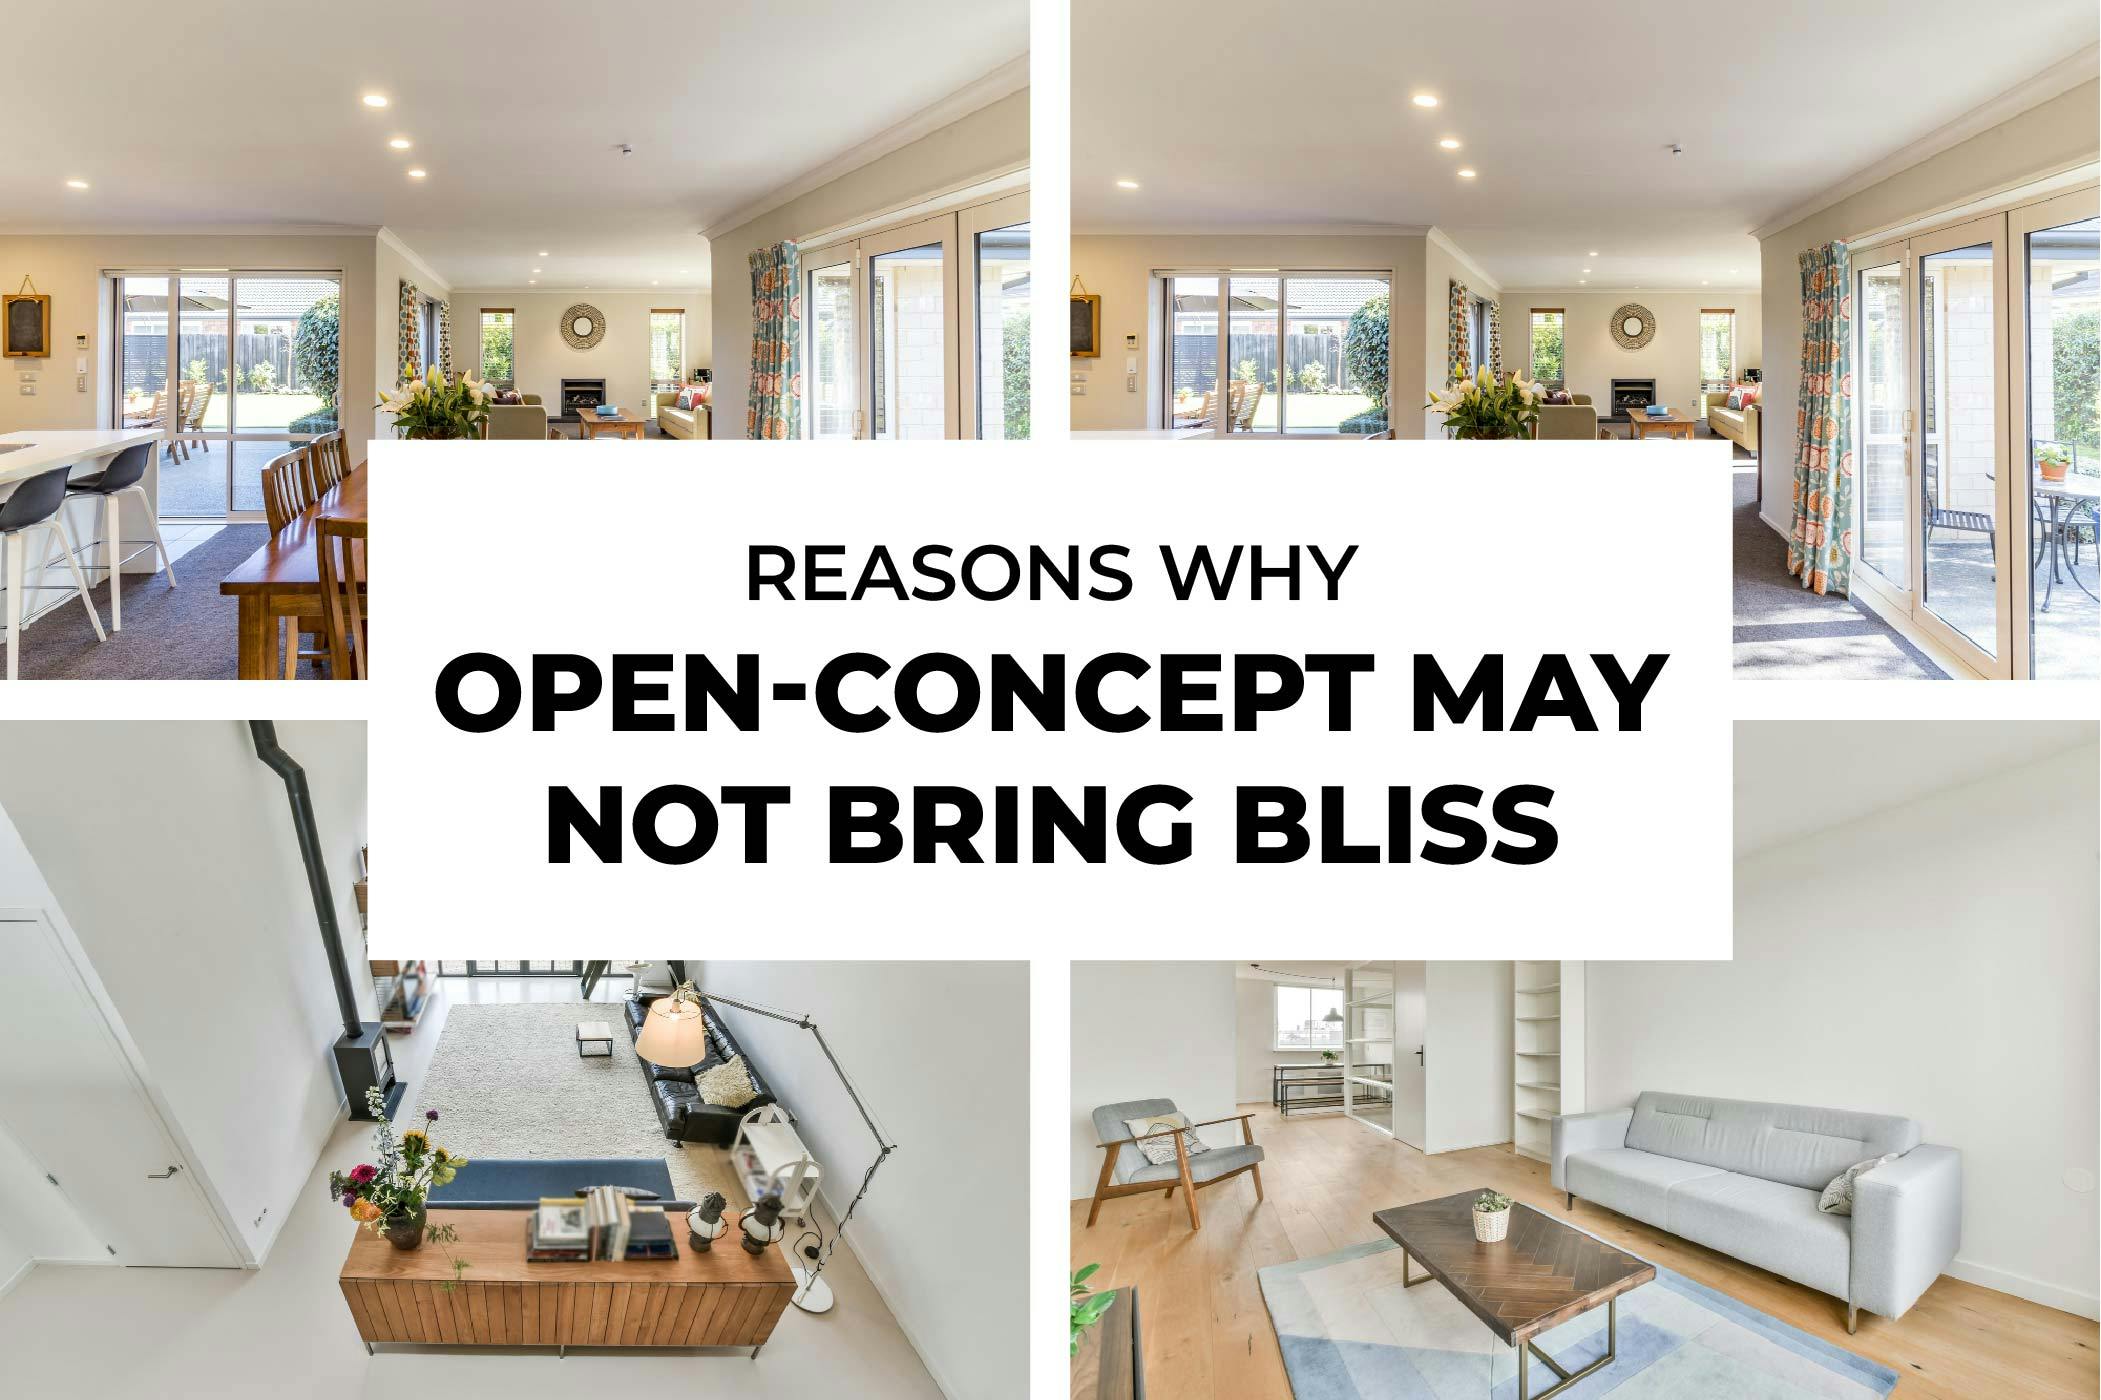 Reasons Why Open-Concept May Not Bring Bliss